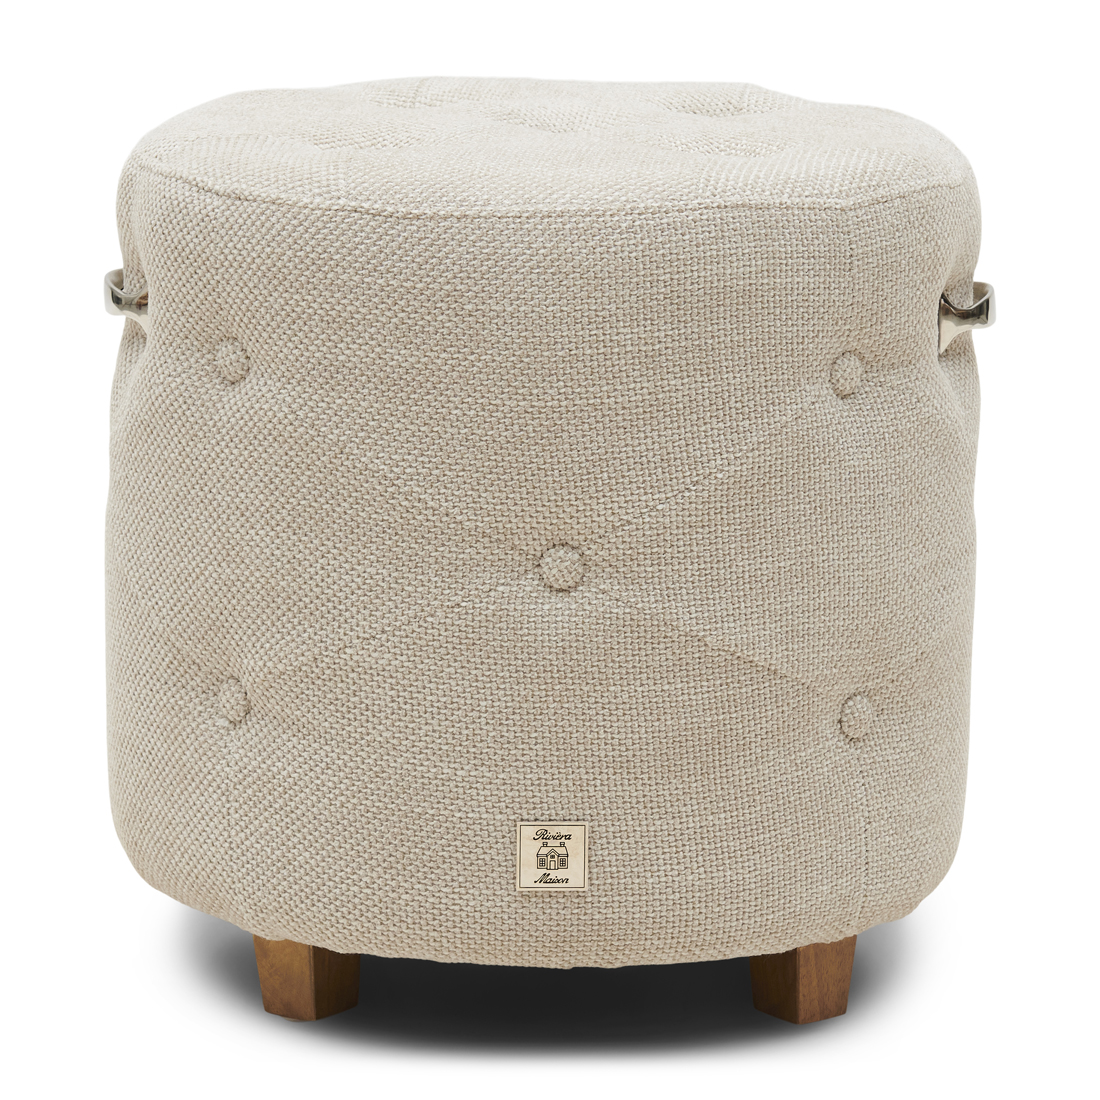 Riviera Maison Bowery Footstool Chelsea Flax - Polyester, Acryl, Rubberhout - Chelsea Flax